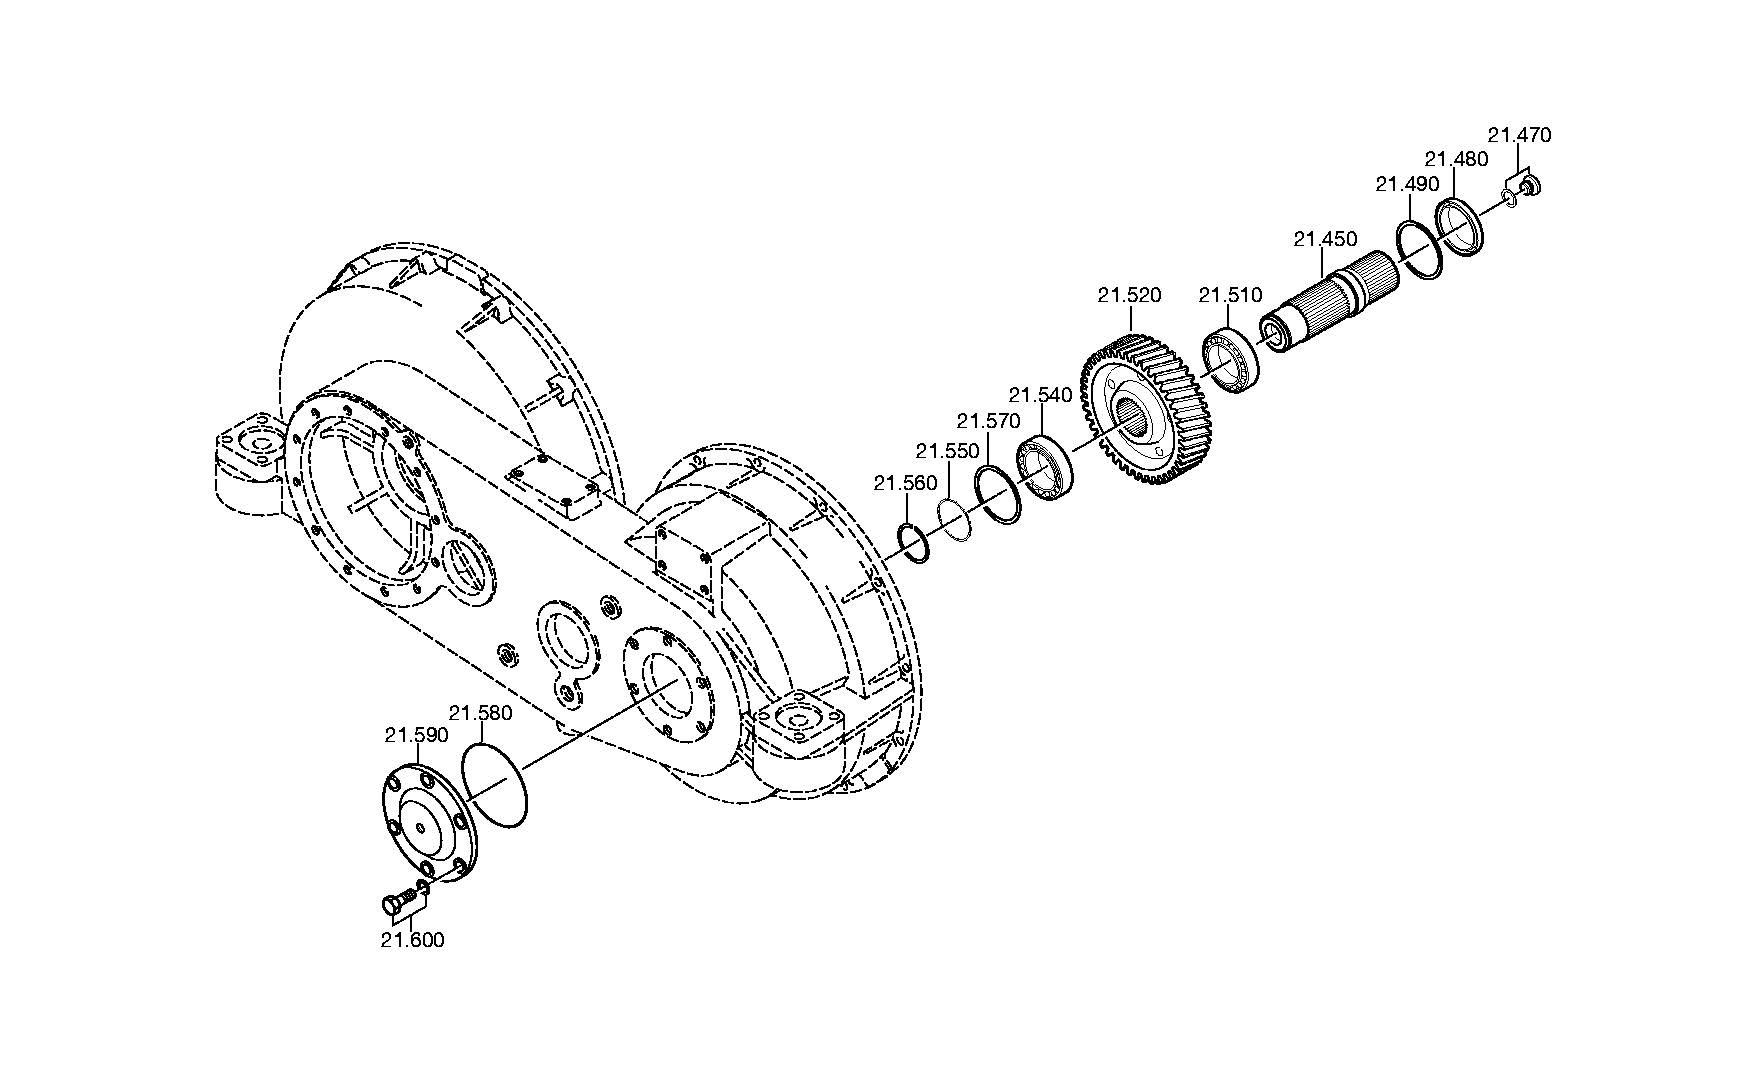 drawing for VOITH-GETRIEBE KG 01.0478.50 - TAPERED ROLLER BEARING (figure 1)